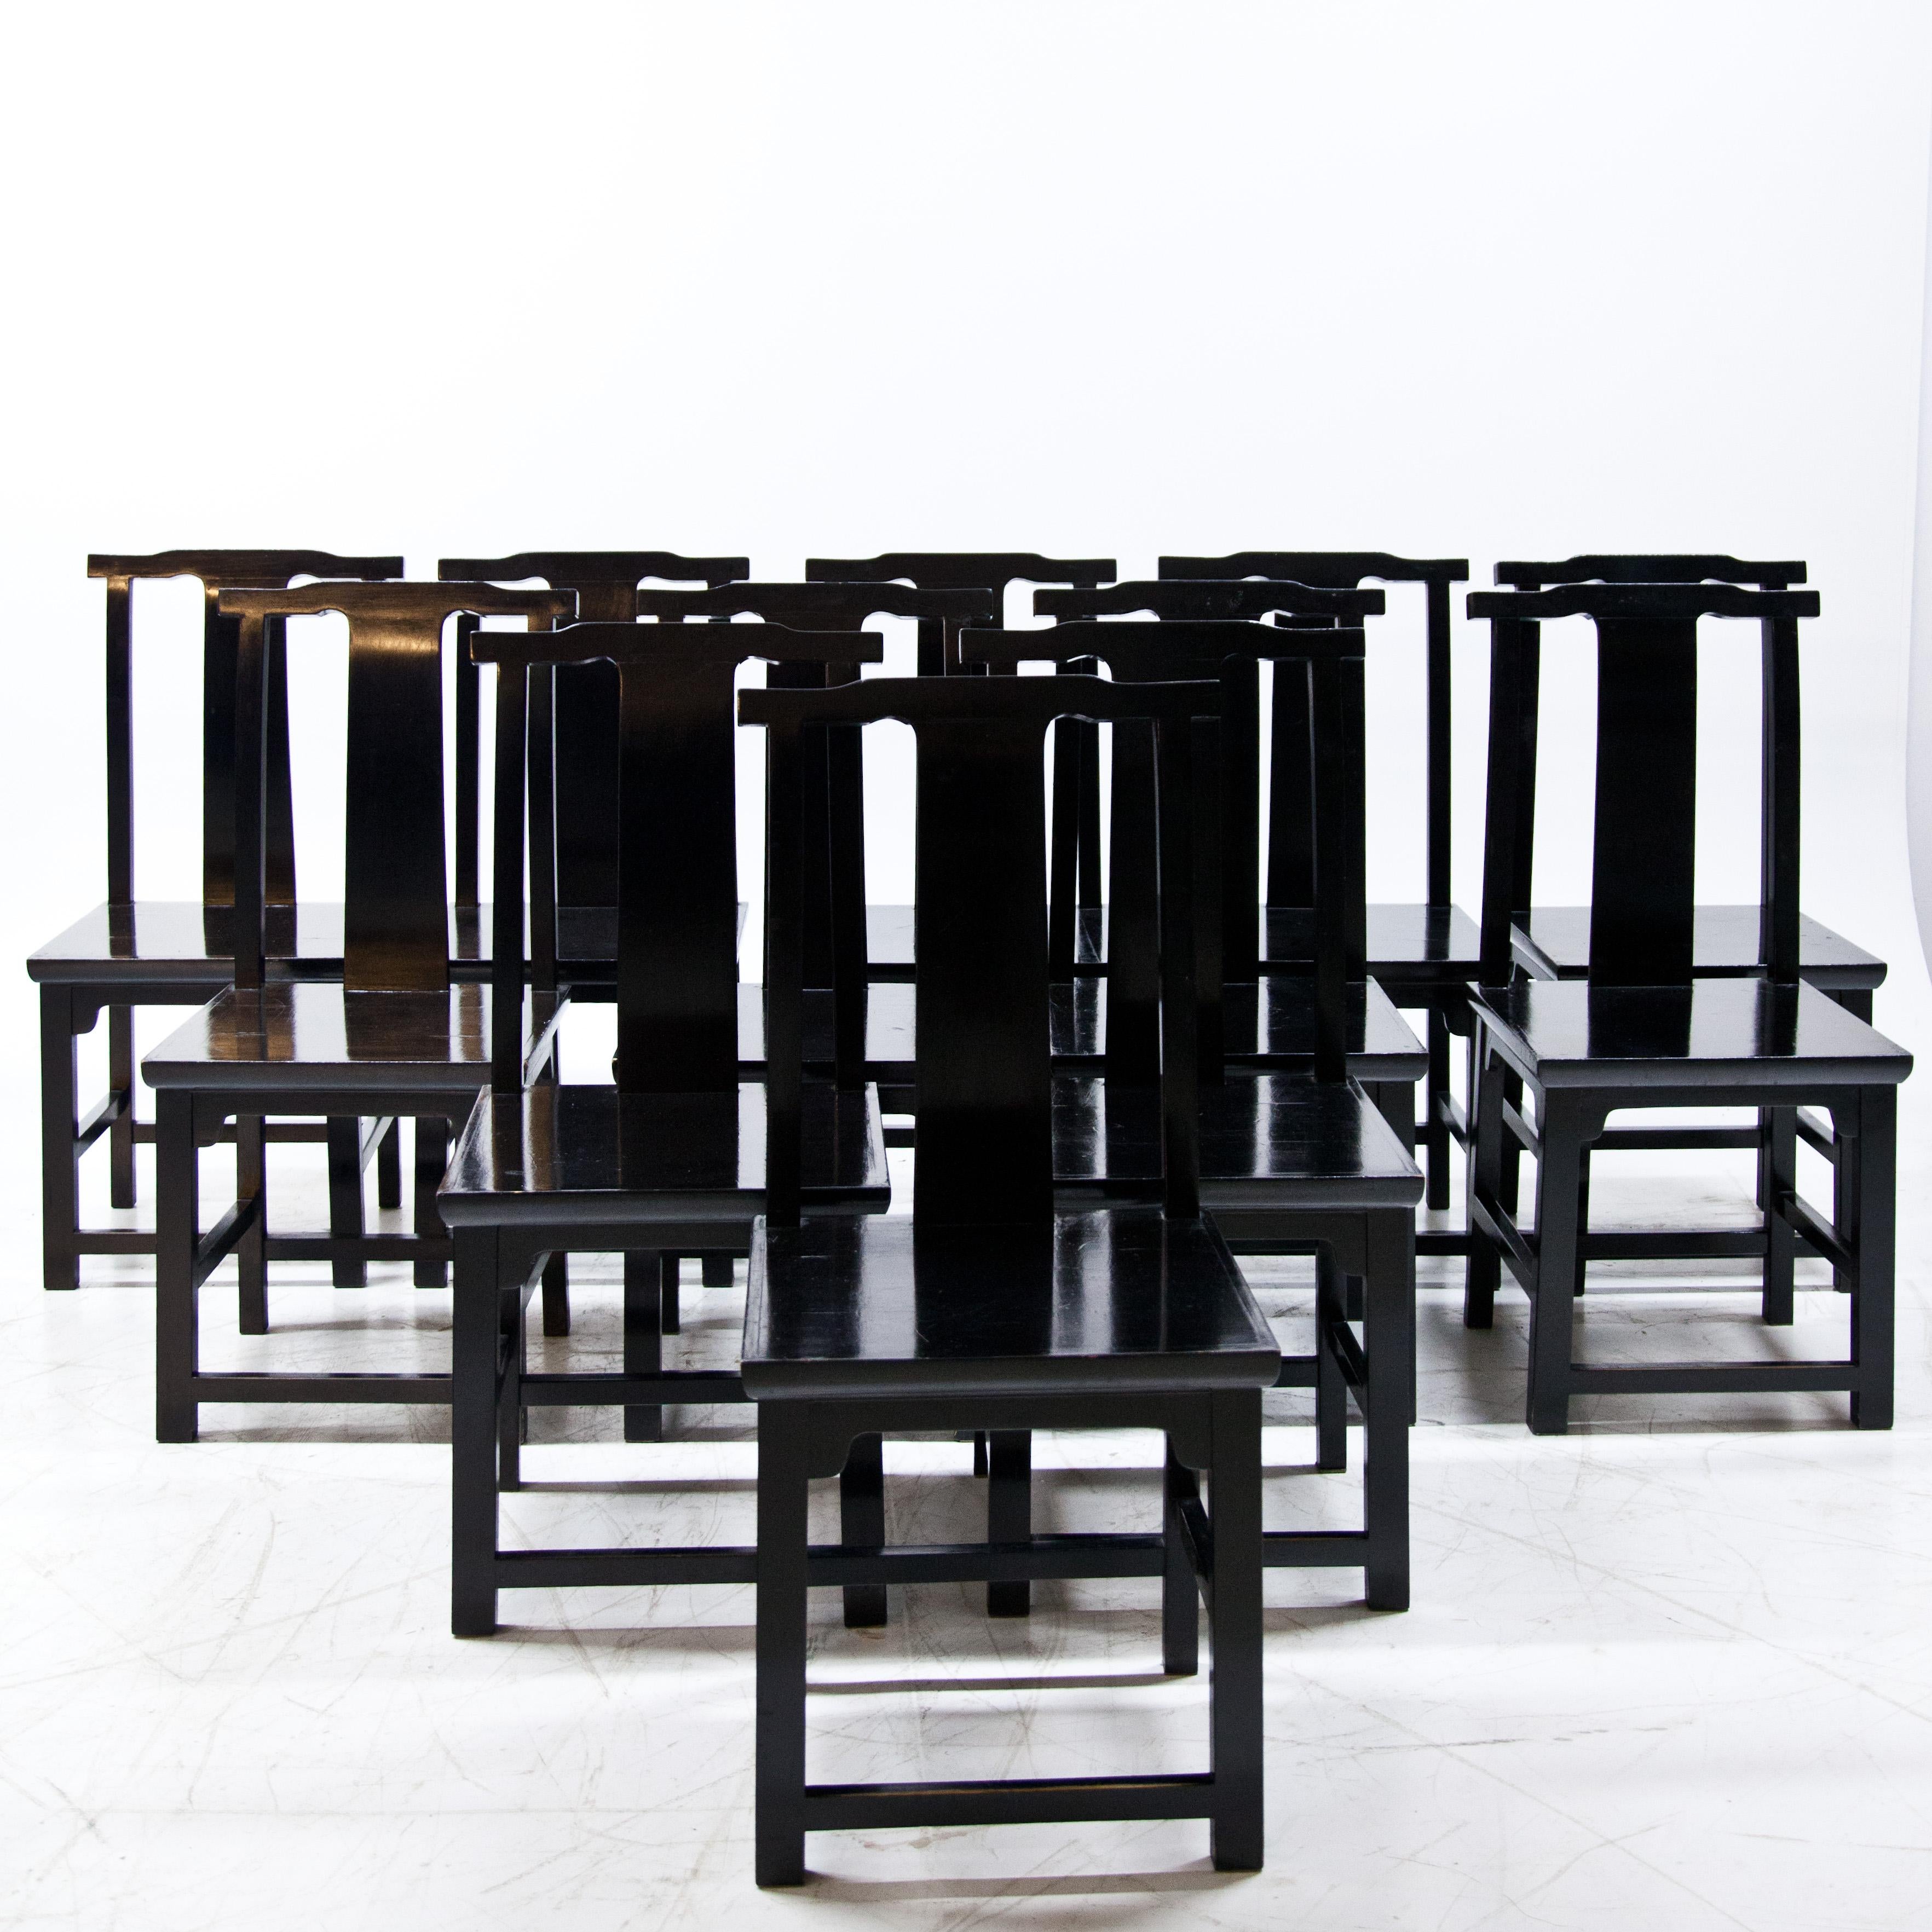 Set of 12 black lacquered wooden chairs in Japanese style with high backrests and straight seats.